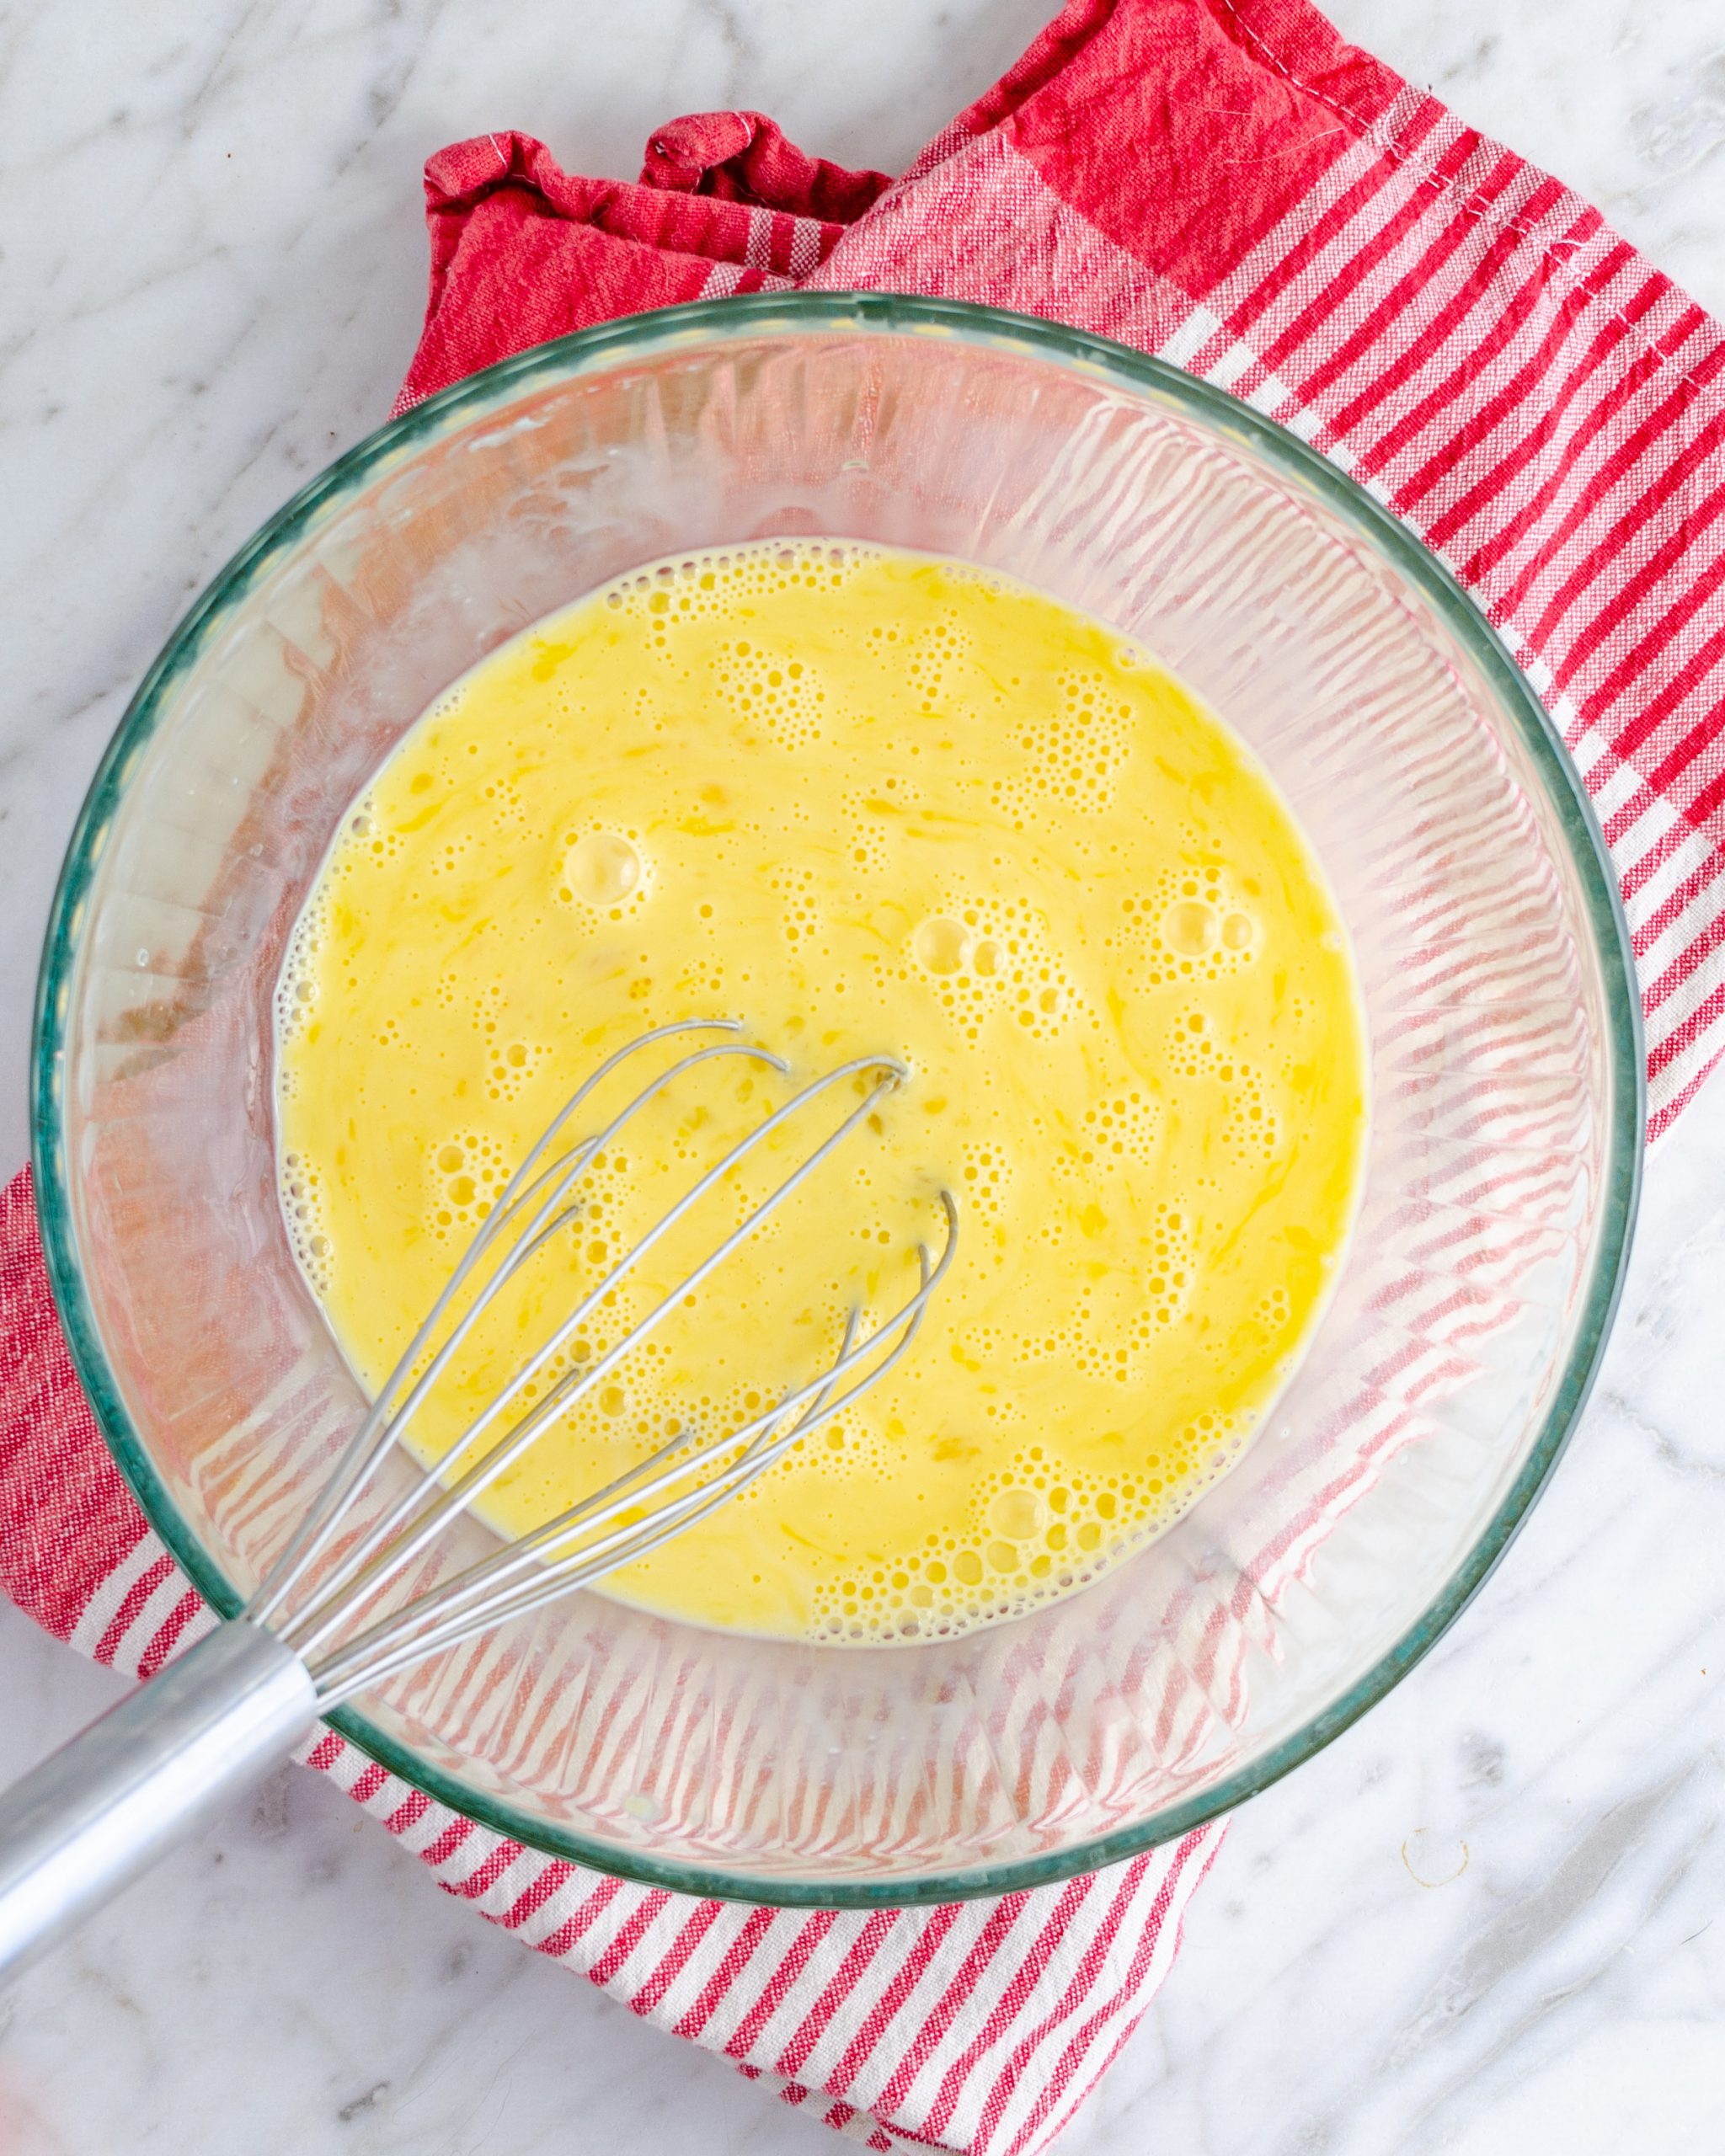 In a bowl, whisk together the eggs and milk until well combined.